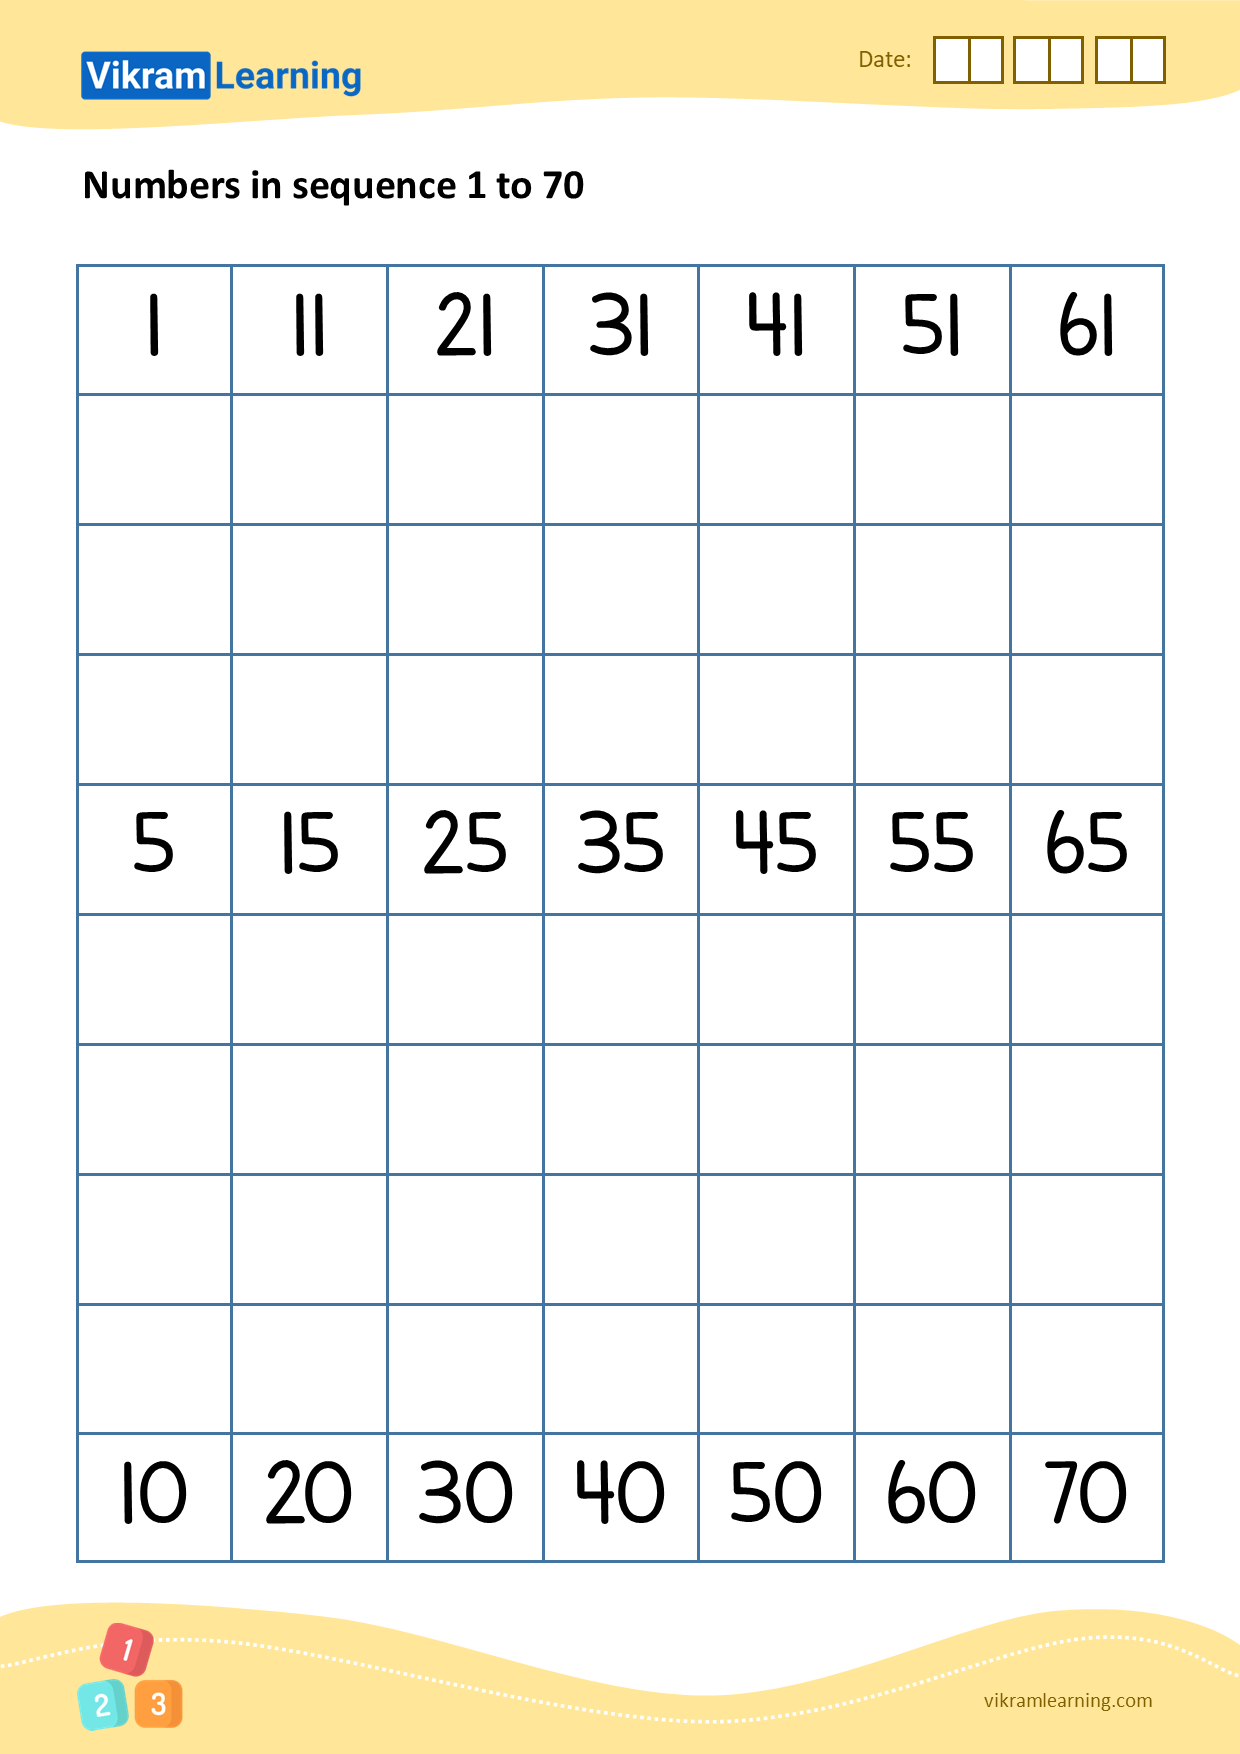 Download 06 - numbers in sequence 1 to 70 worksheets